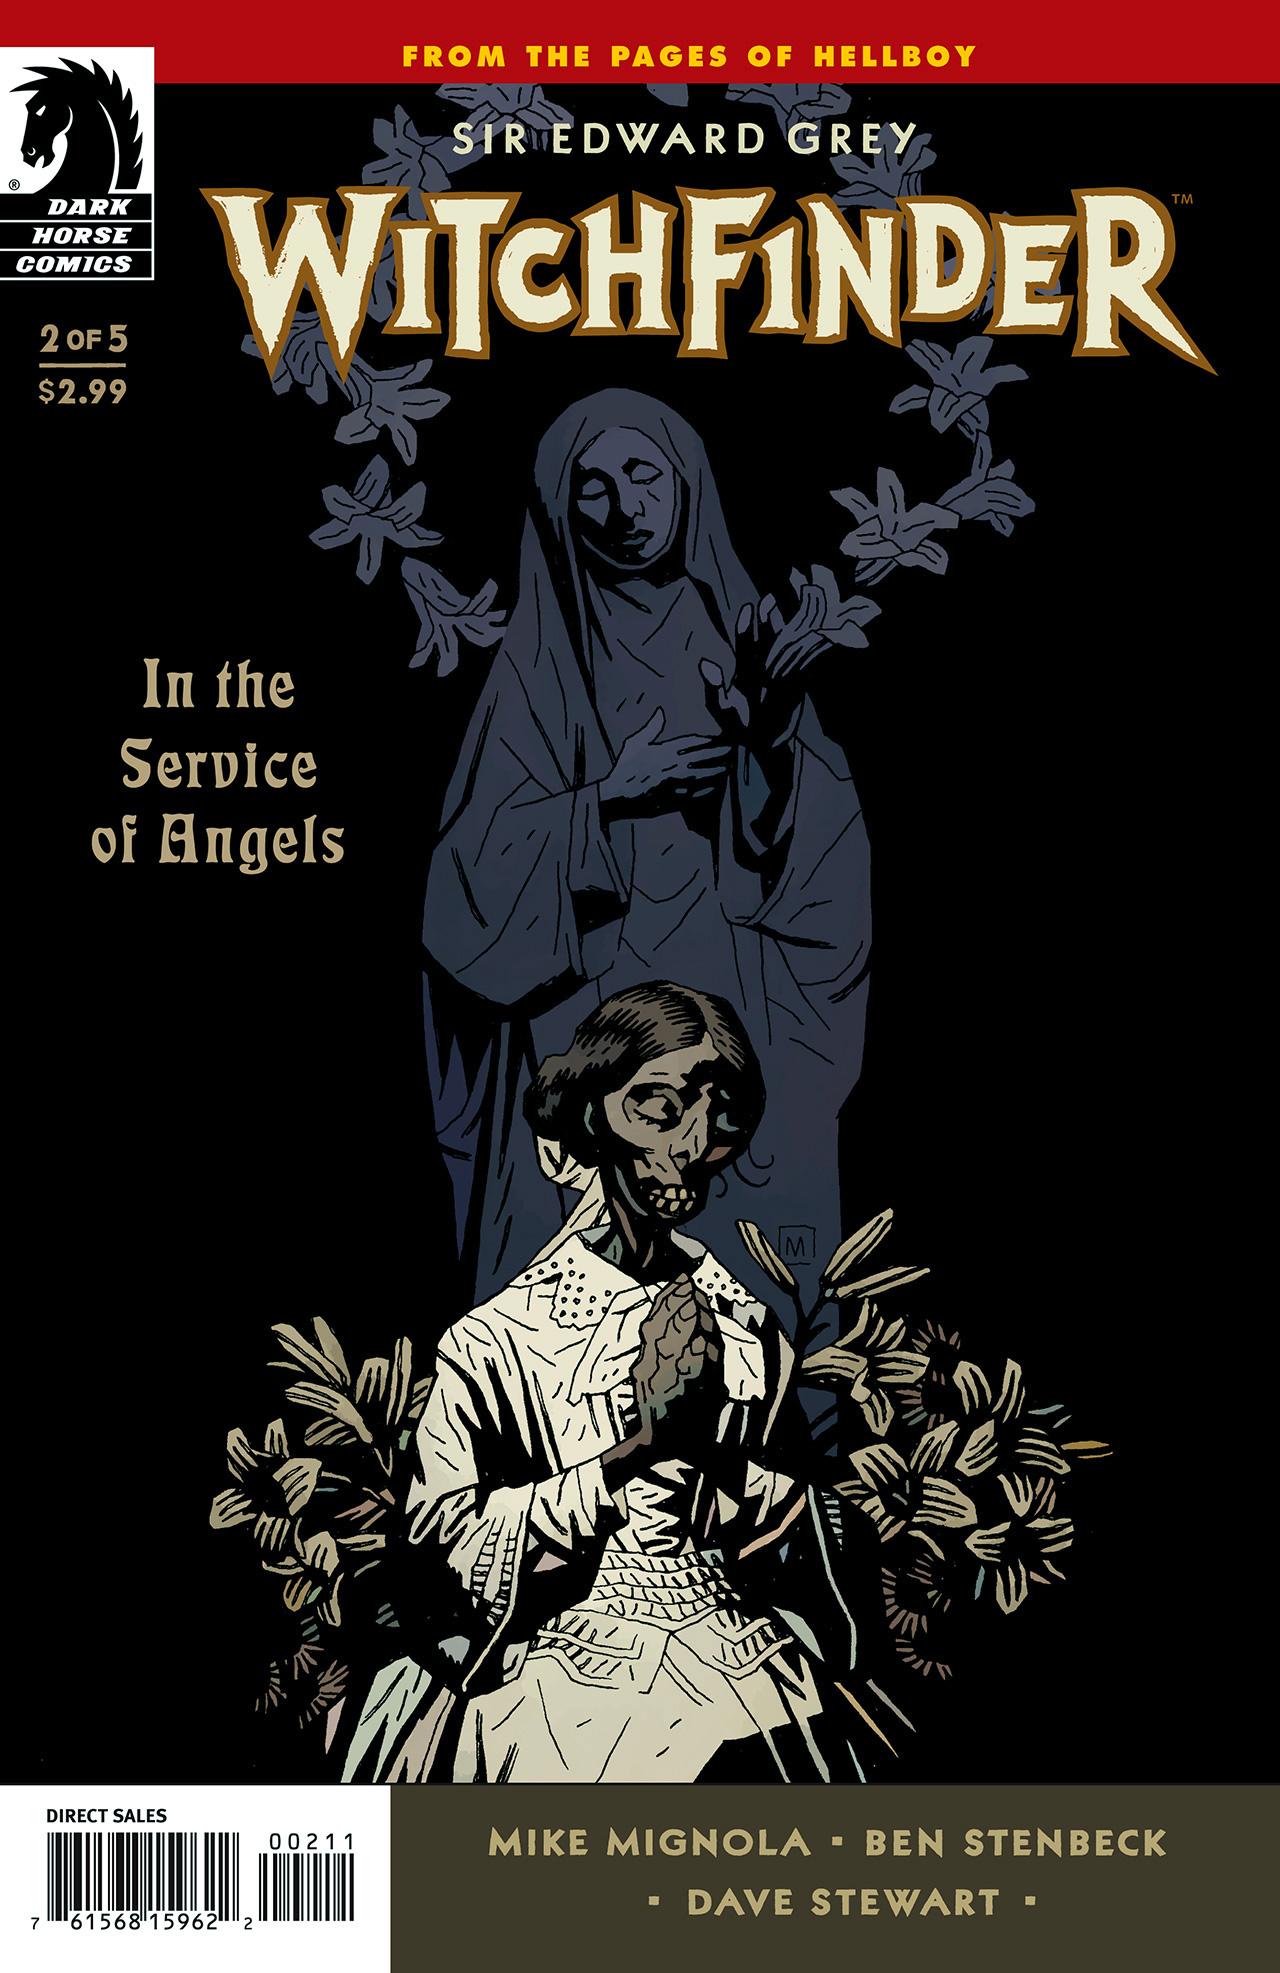 Sir Edward Grey Witchfinder: In the Service of Angels Vol. 1 #2